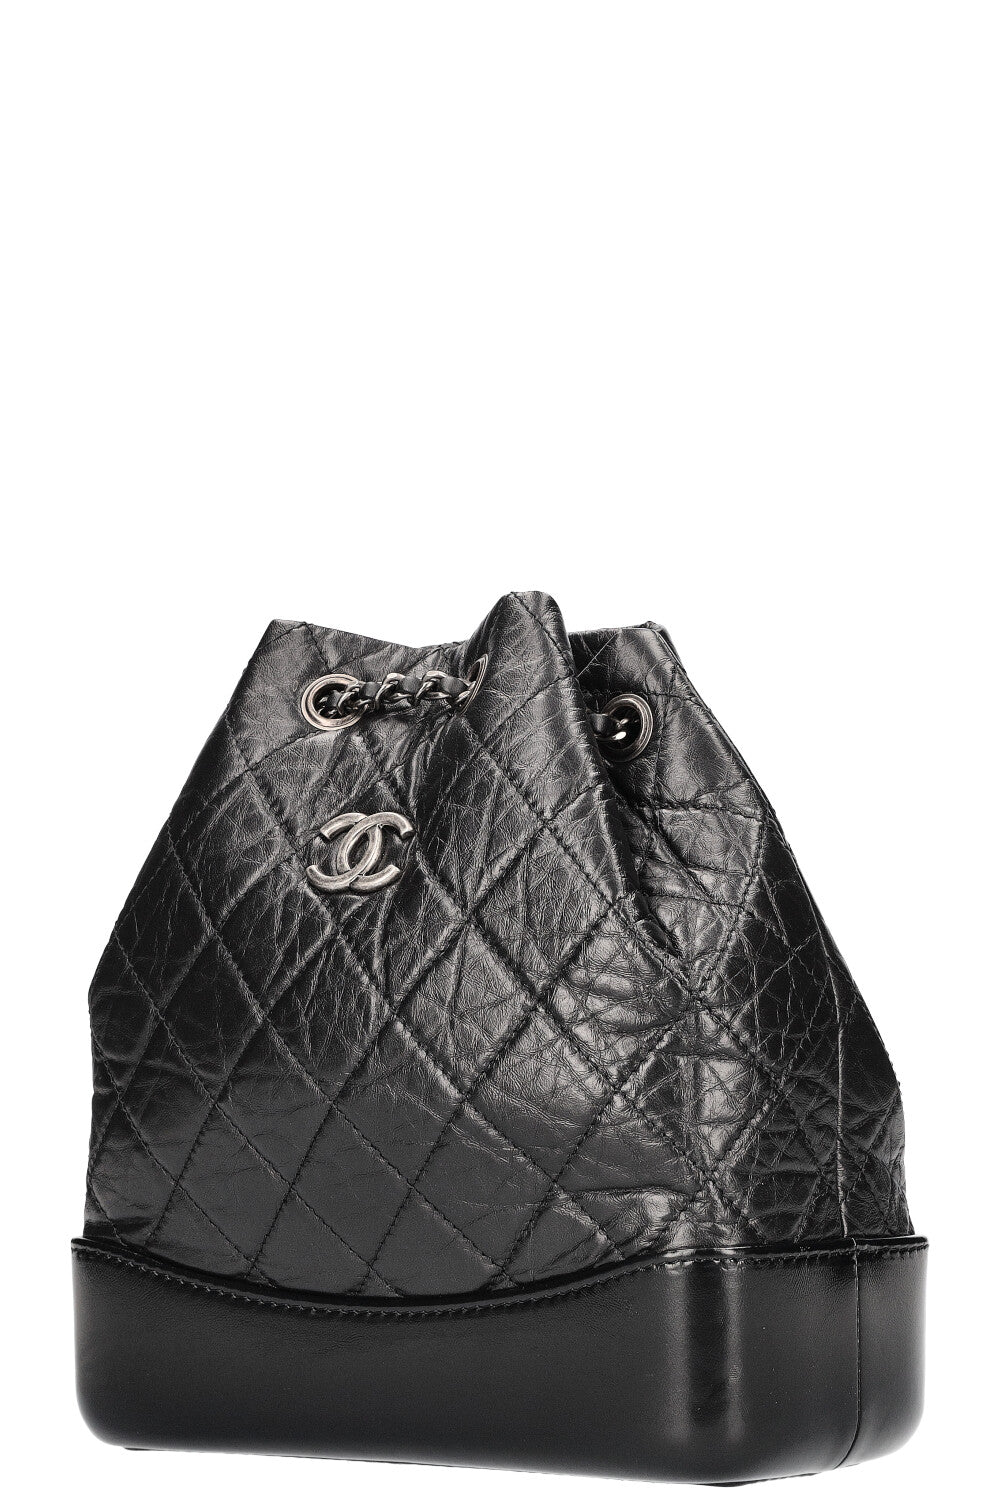 CHANEL Gabrielle Backpack Small Black